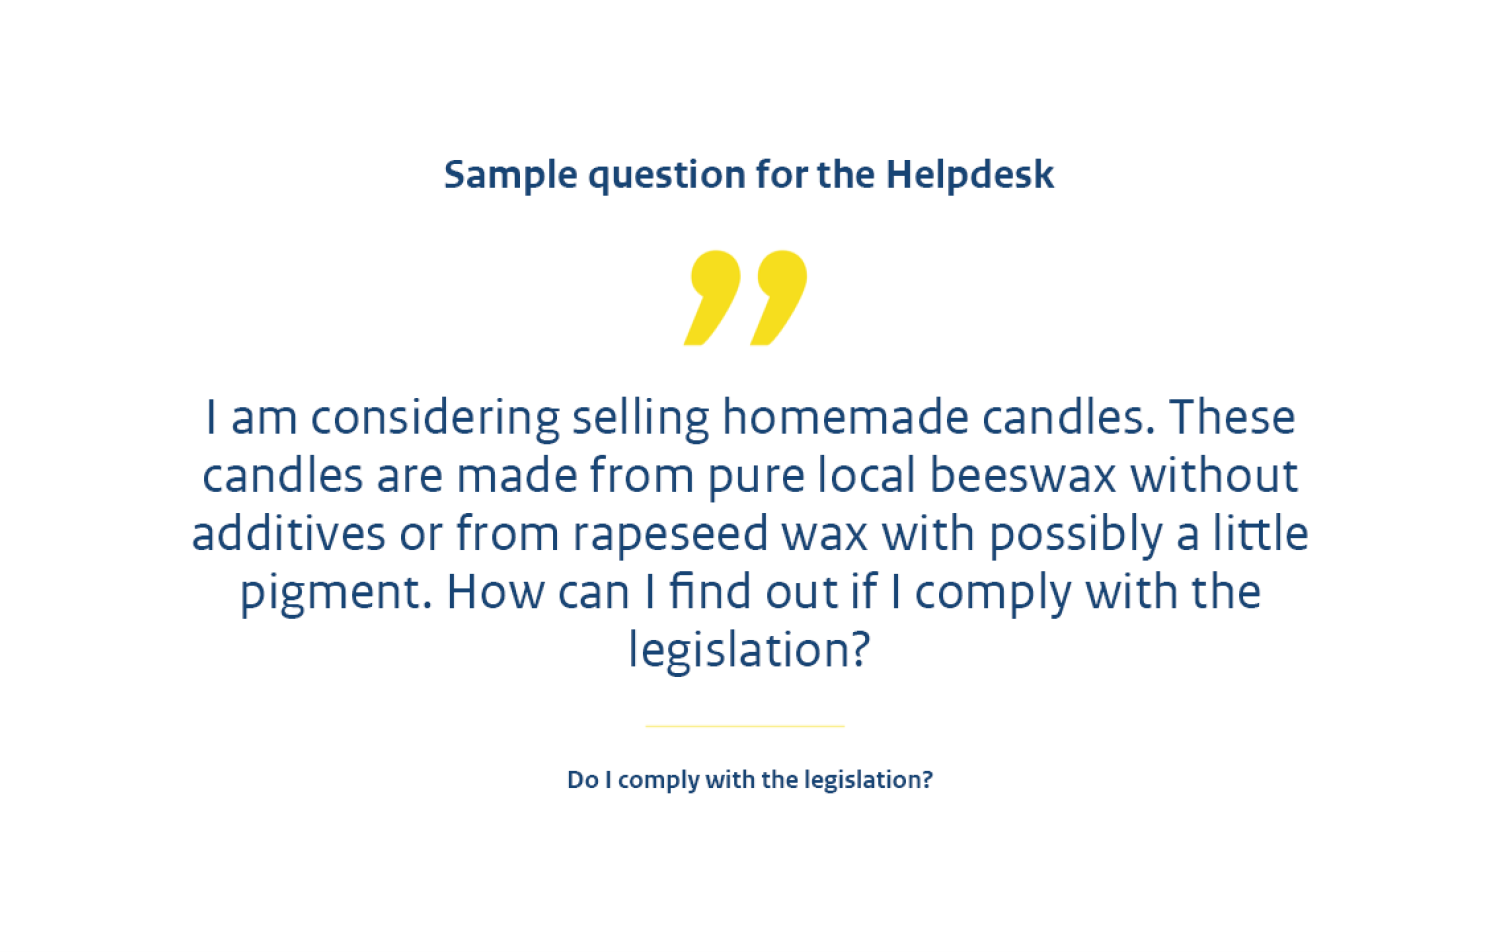 Sample question: I am considering selling homemade candles. These candles are made from pure local beeswax without additives or from rapeseed wax with possibly a little pigment. How can I find out if I comply with the legislation?